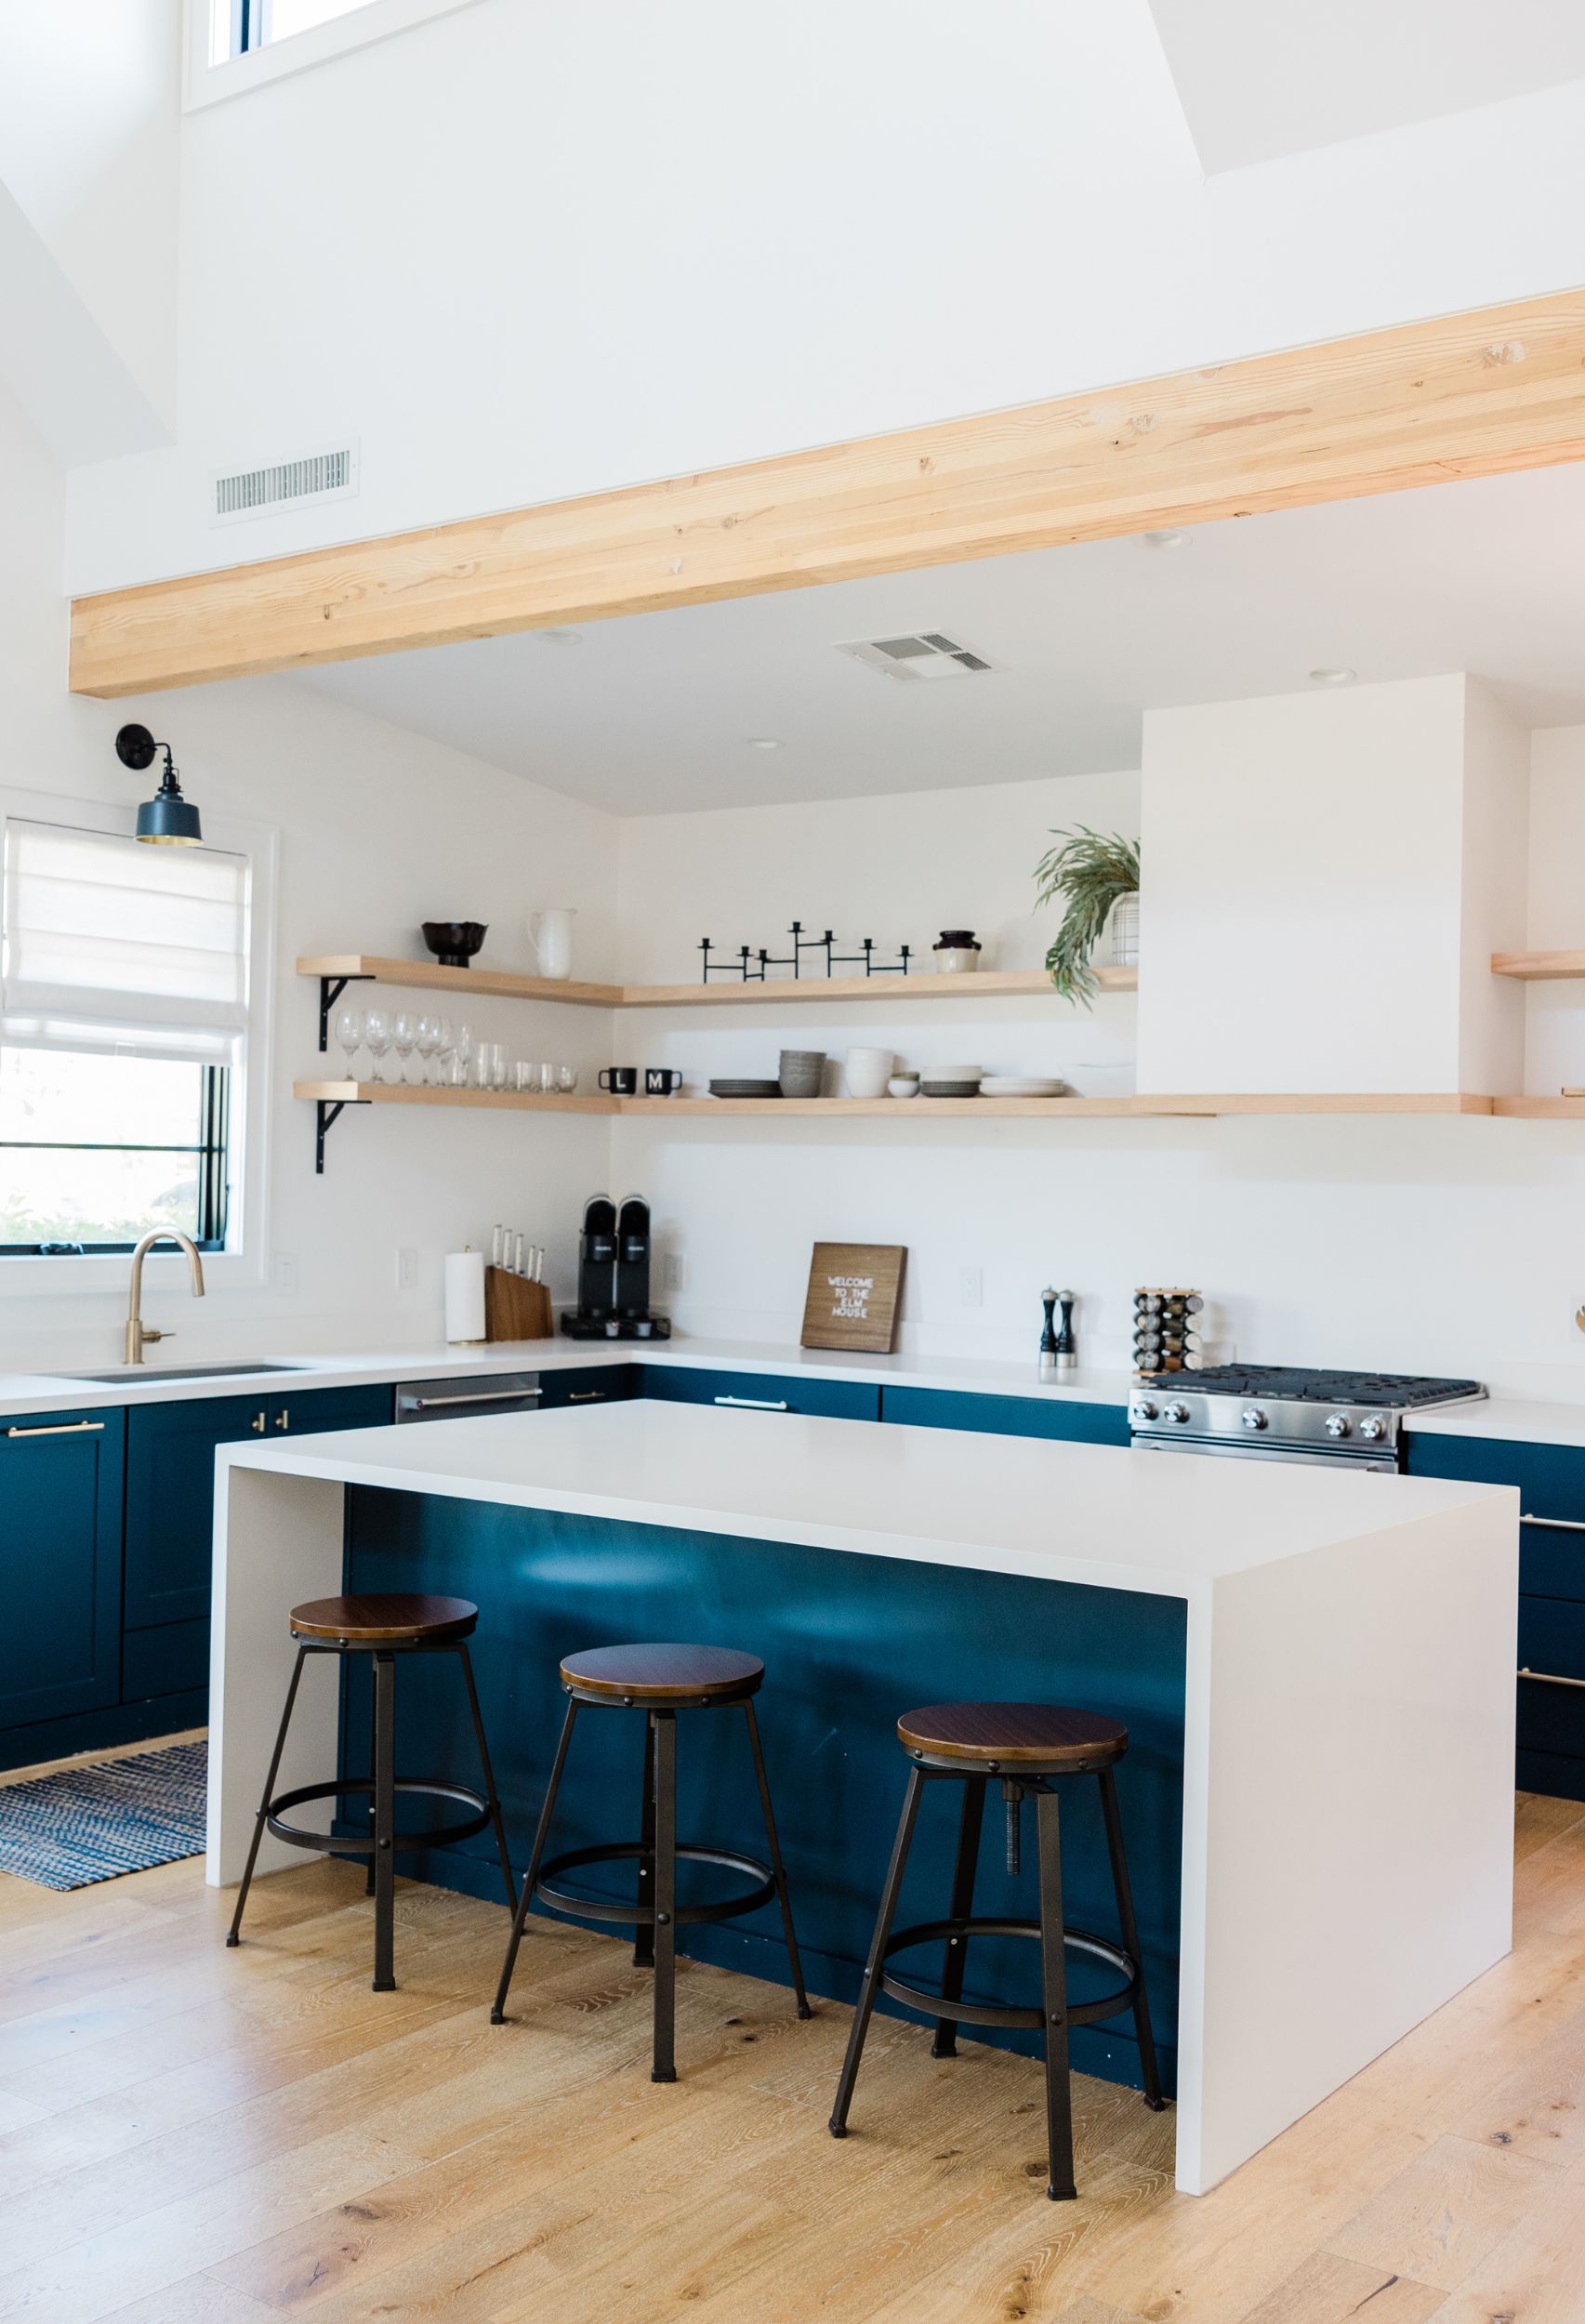 The Five Updates To Make When Doing A Kitchen Remodeling